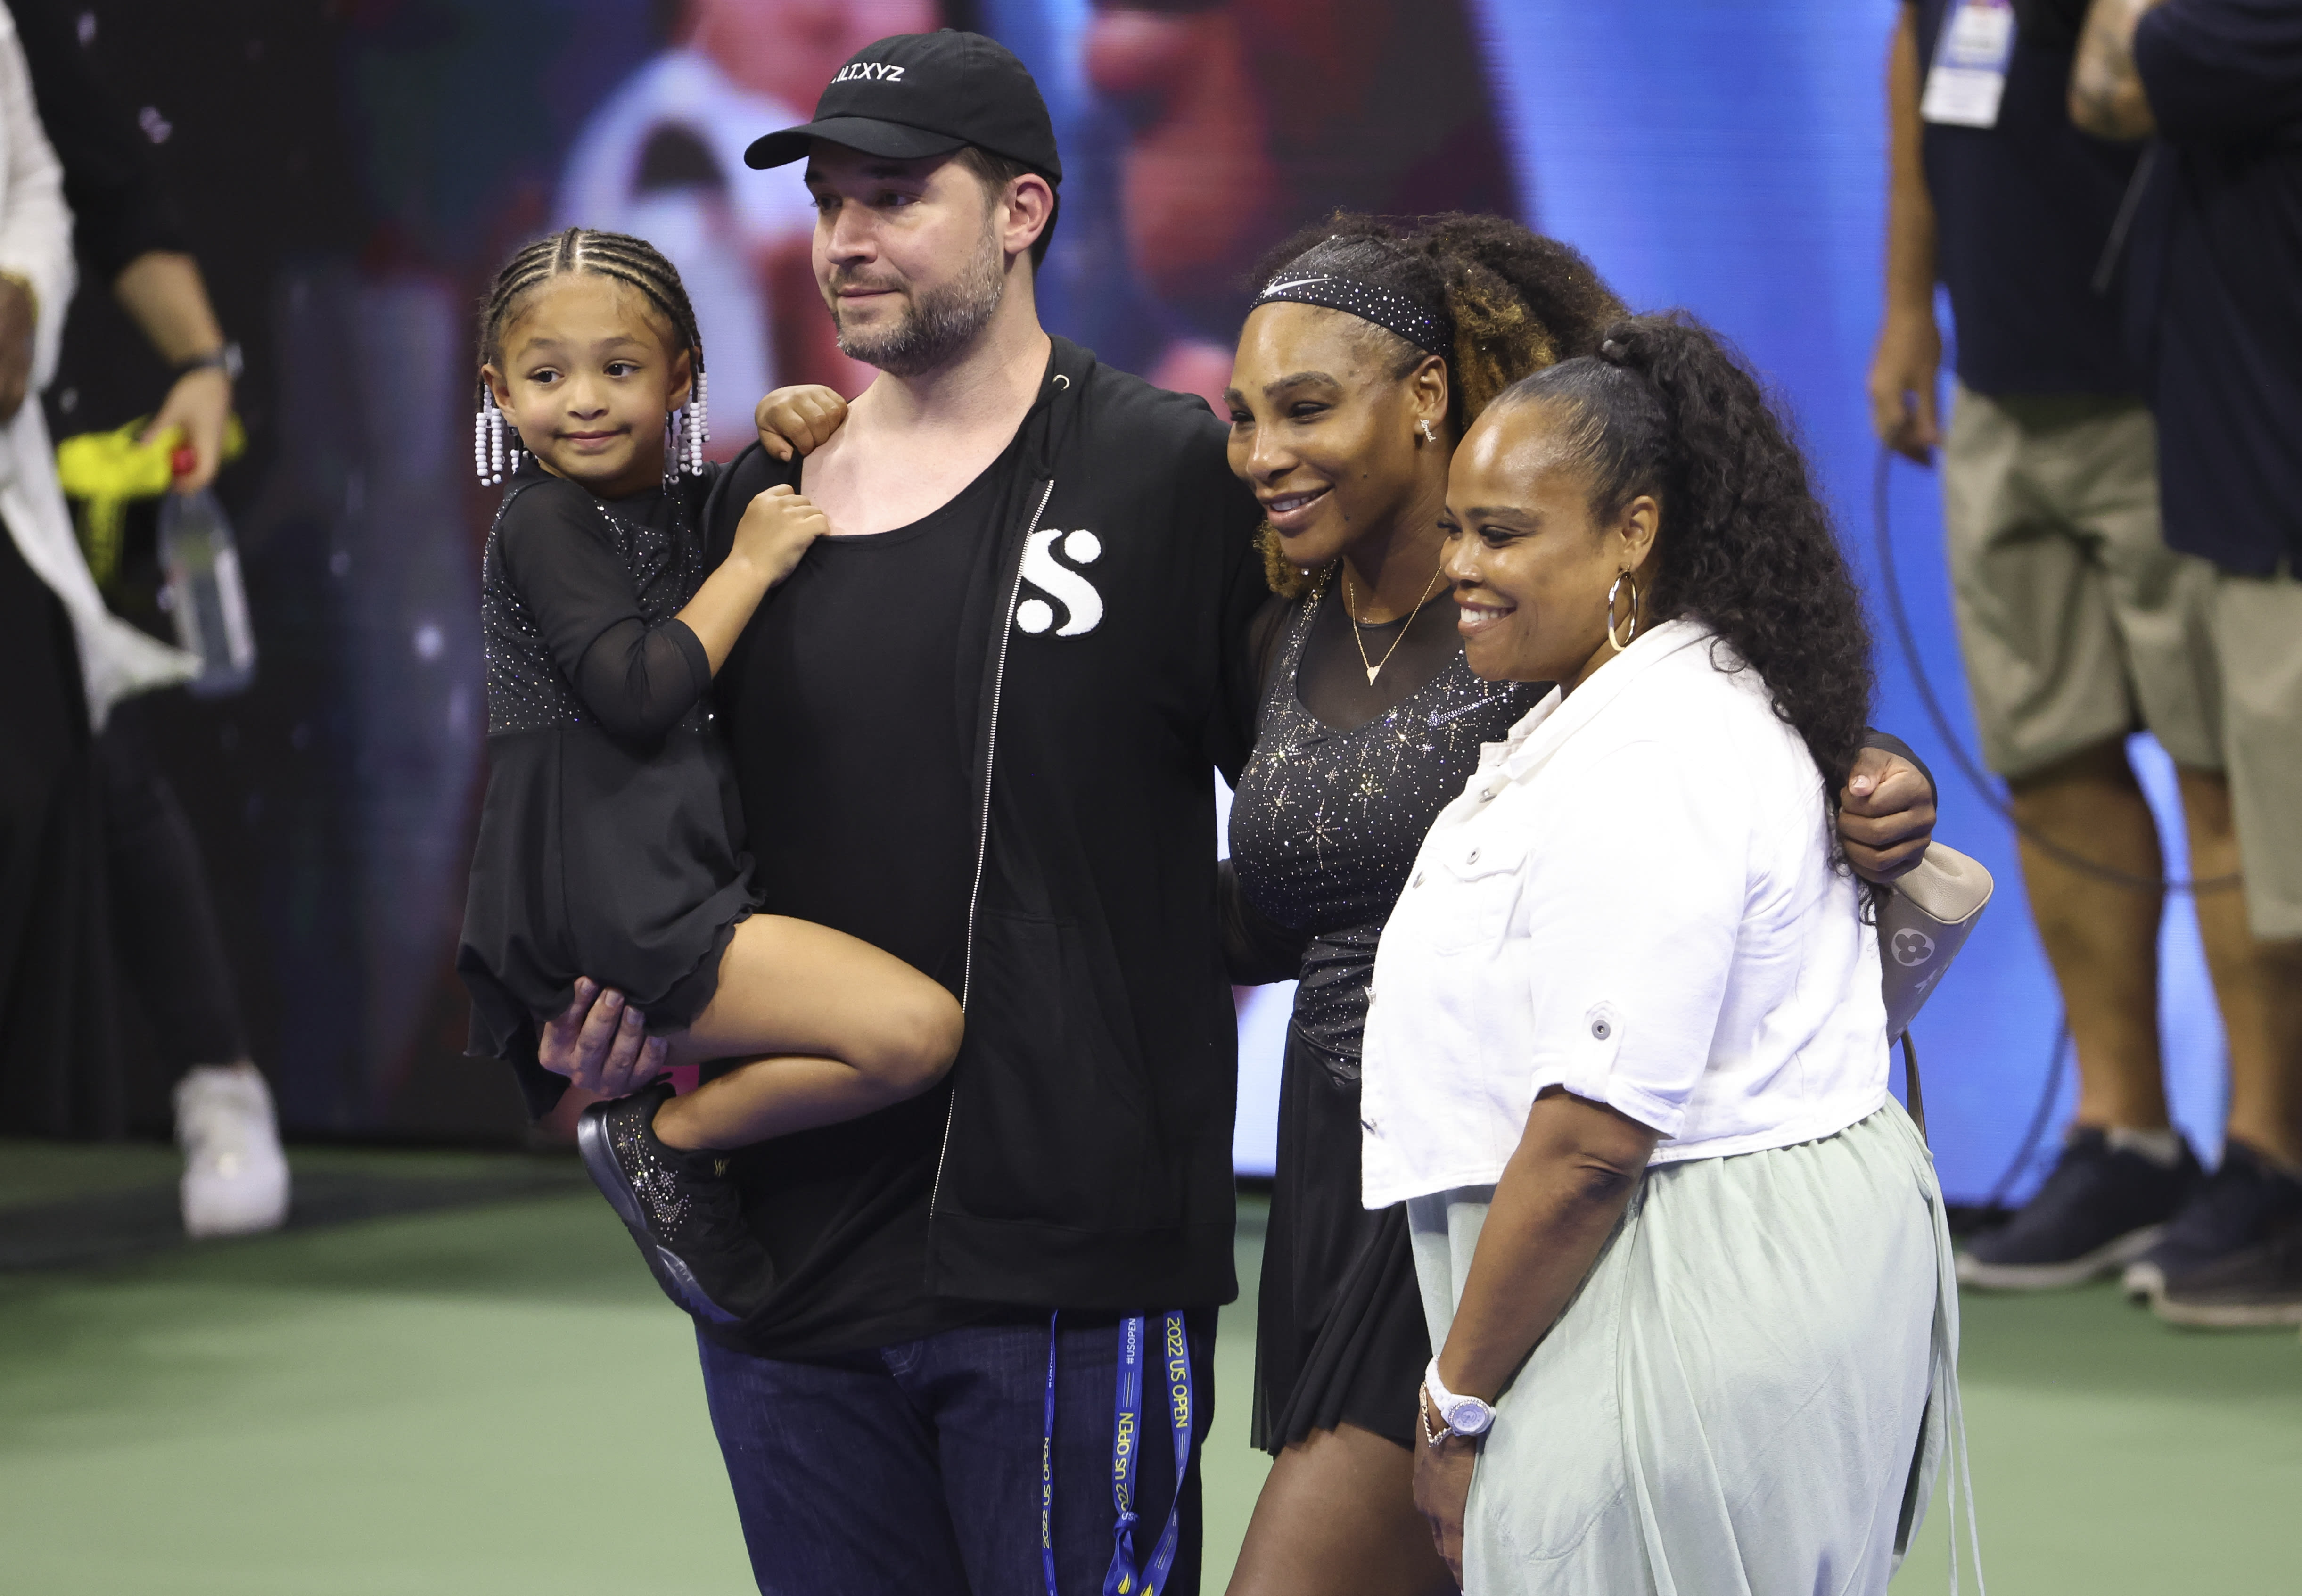 Serena Williams and her family at the 2022 US Open